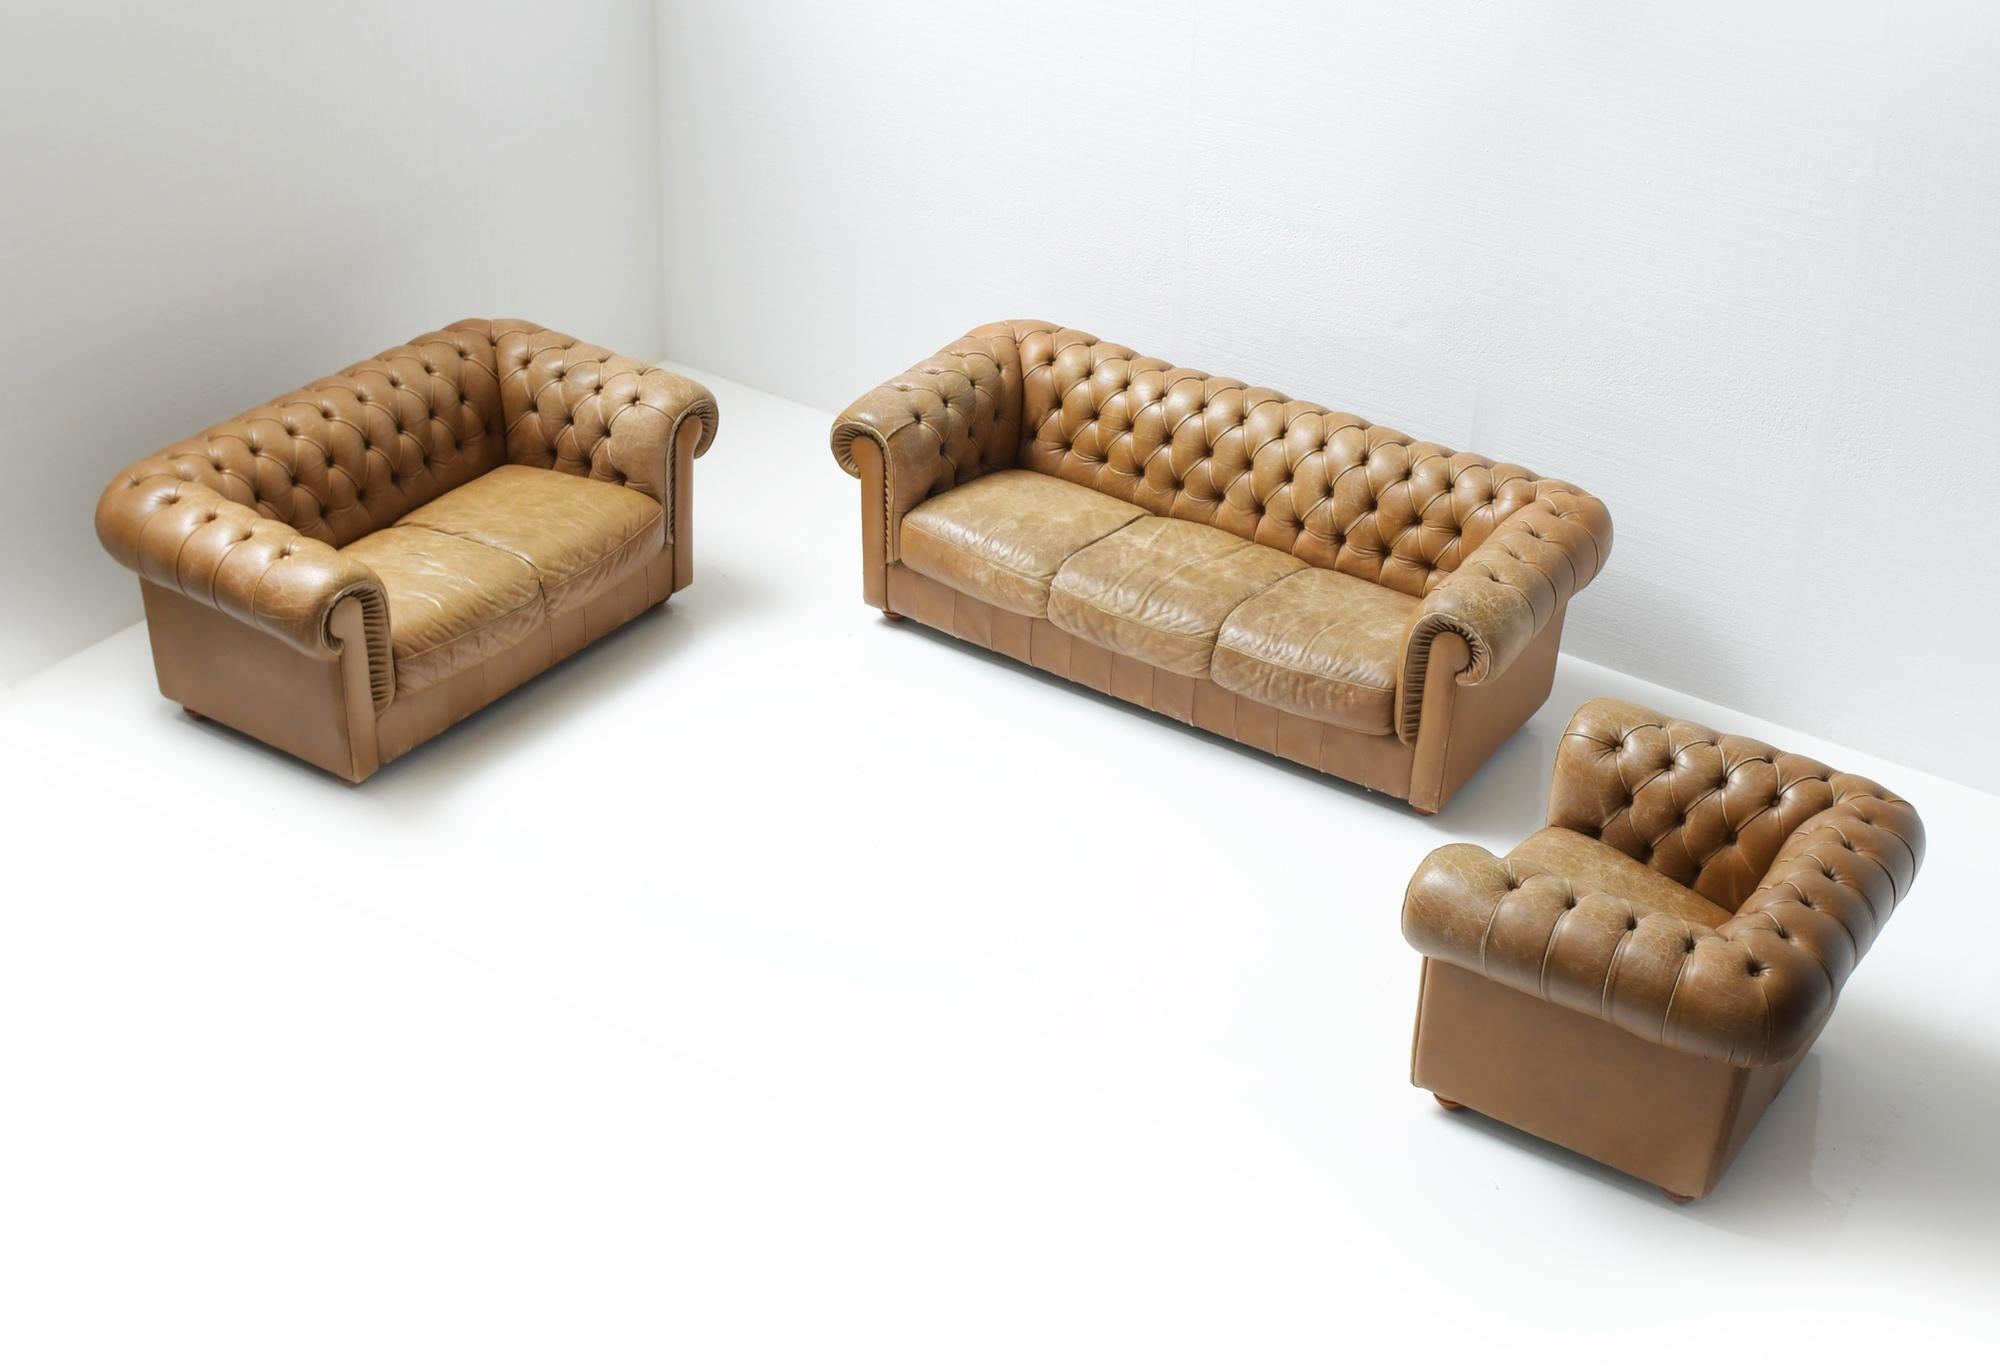 Stunning matching Chesterfield by Natuzzi Italy.
First onwer - 1991

Great vintage condition.